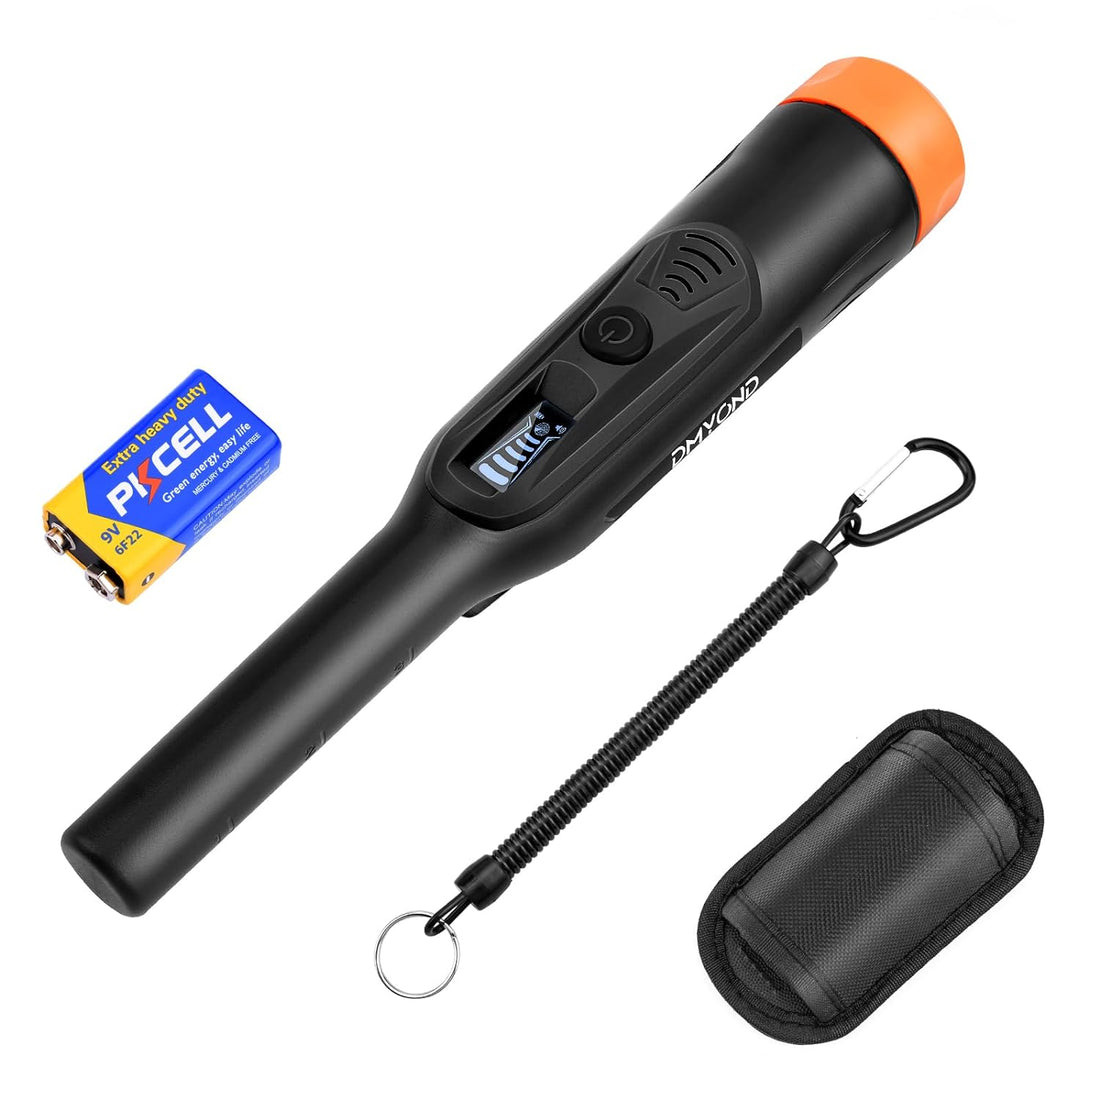 Dmyond Metal Detector Pinpointer, IP66 Waterproof Handheld Pin Pointer Wand, Hight Sensitivity 3 Modes Pinpointing Finder Probeor Gold, Coins, Detecting Accessories for Adults, Kids - Black